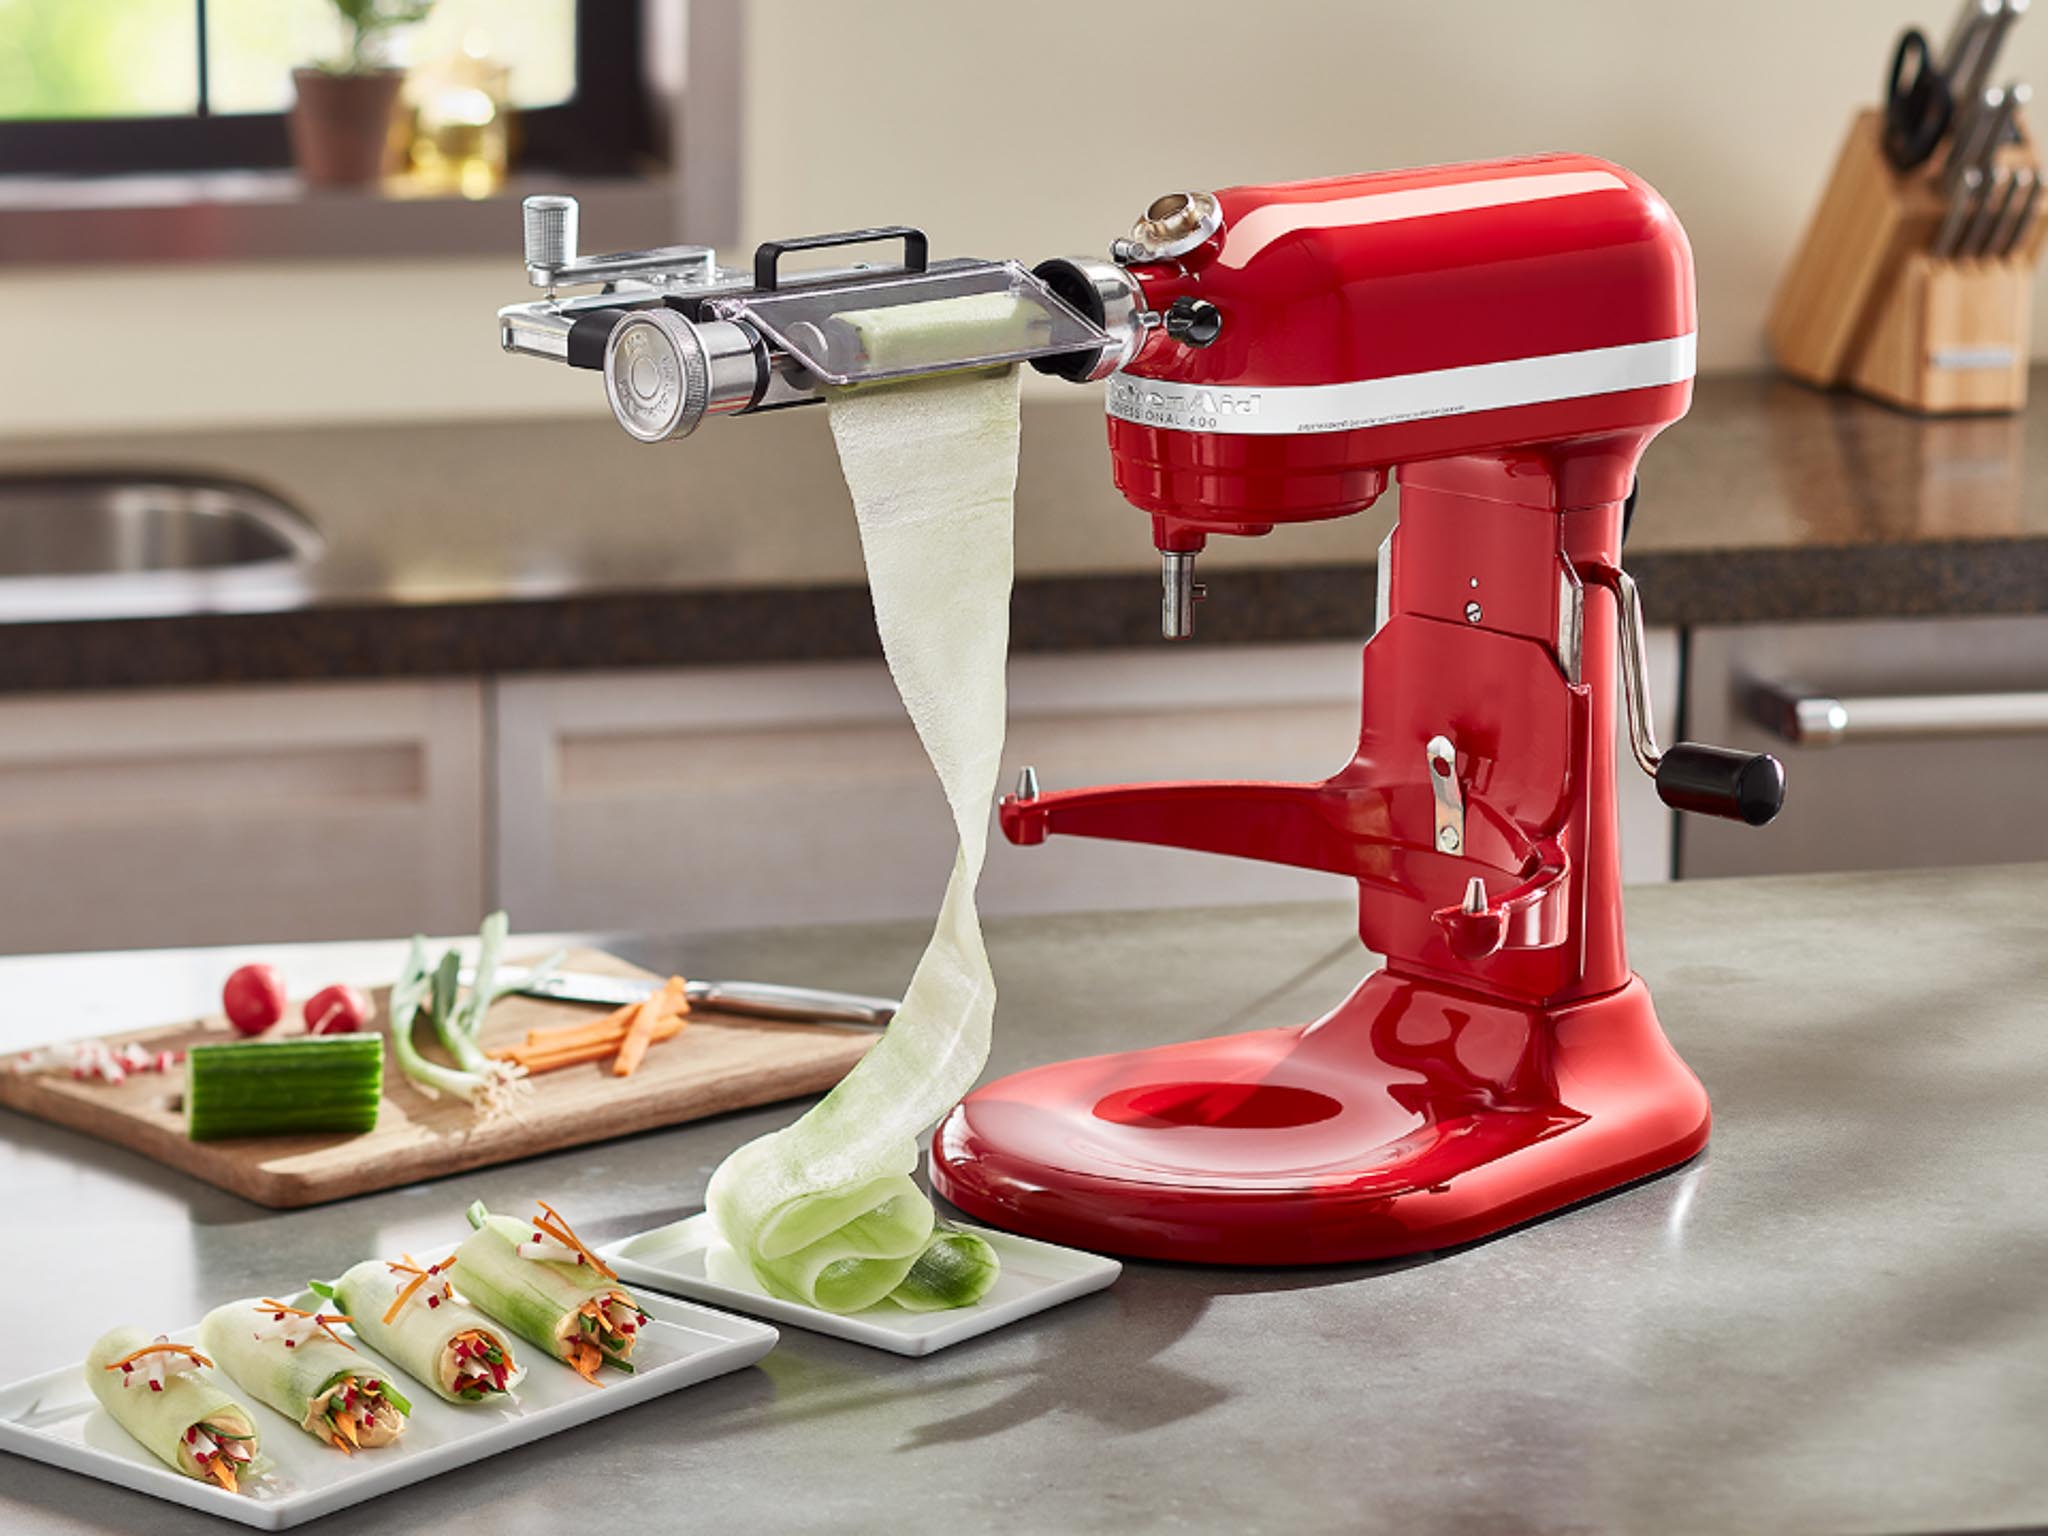 Mixer Attachments Vegetable-Sheet-Cutter with veggies